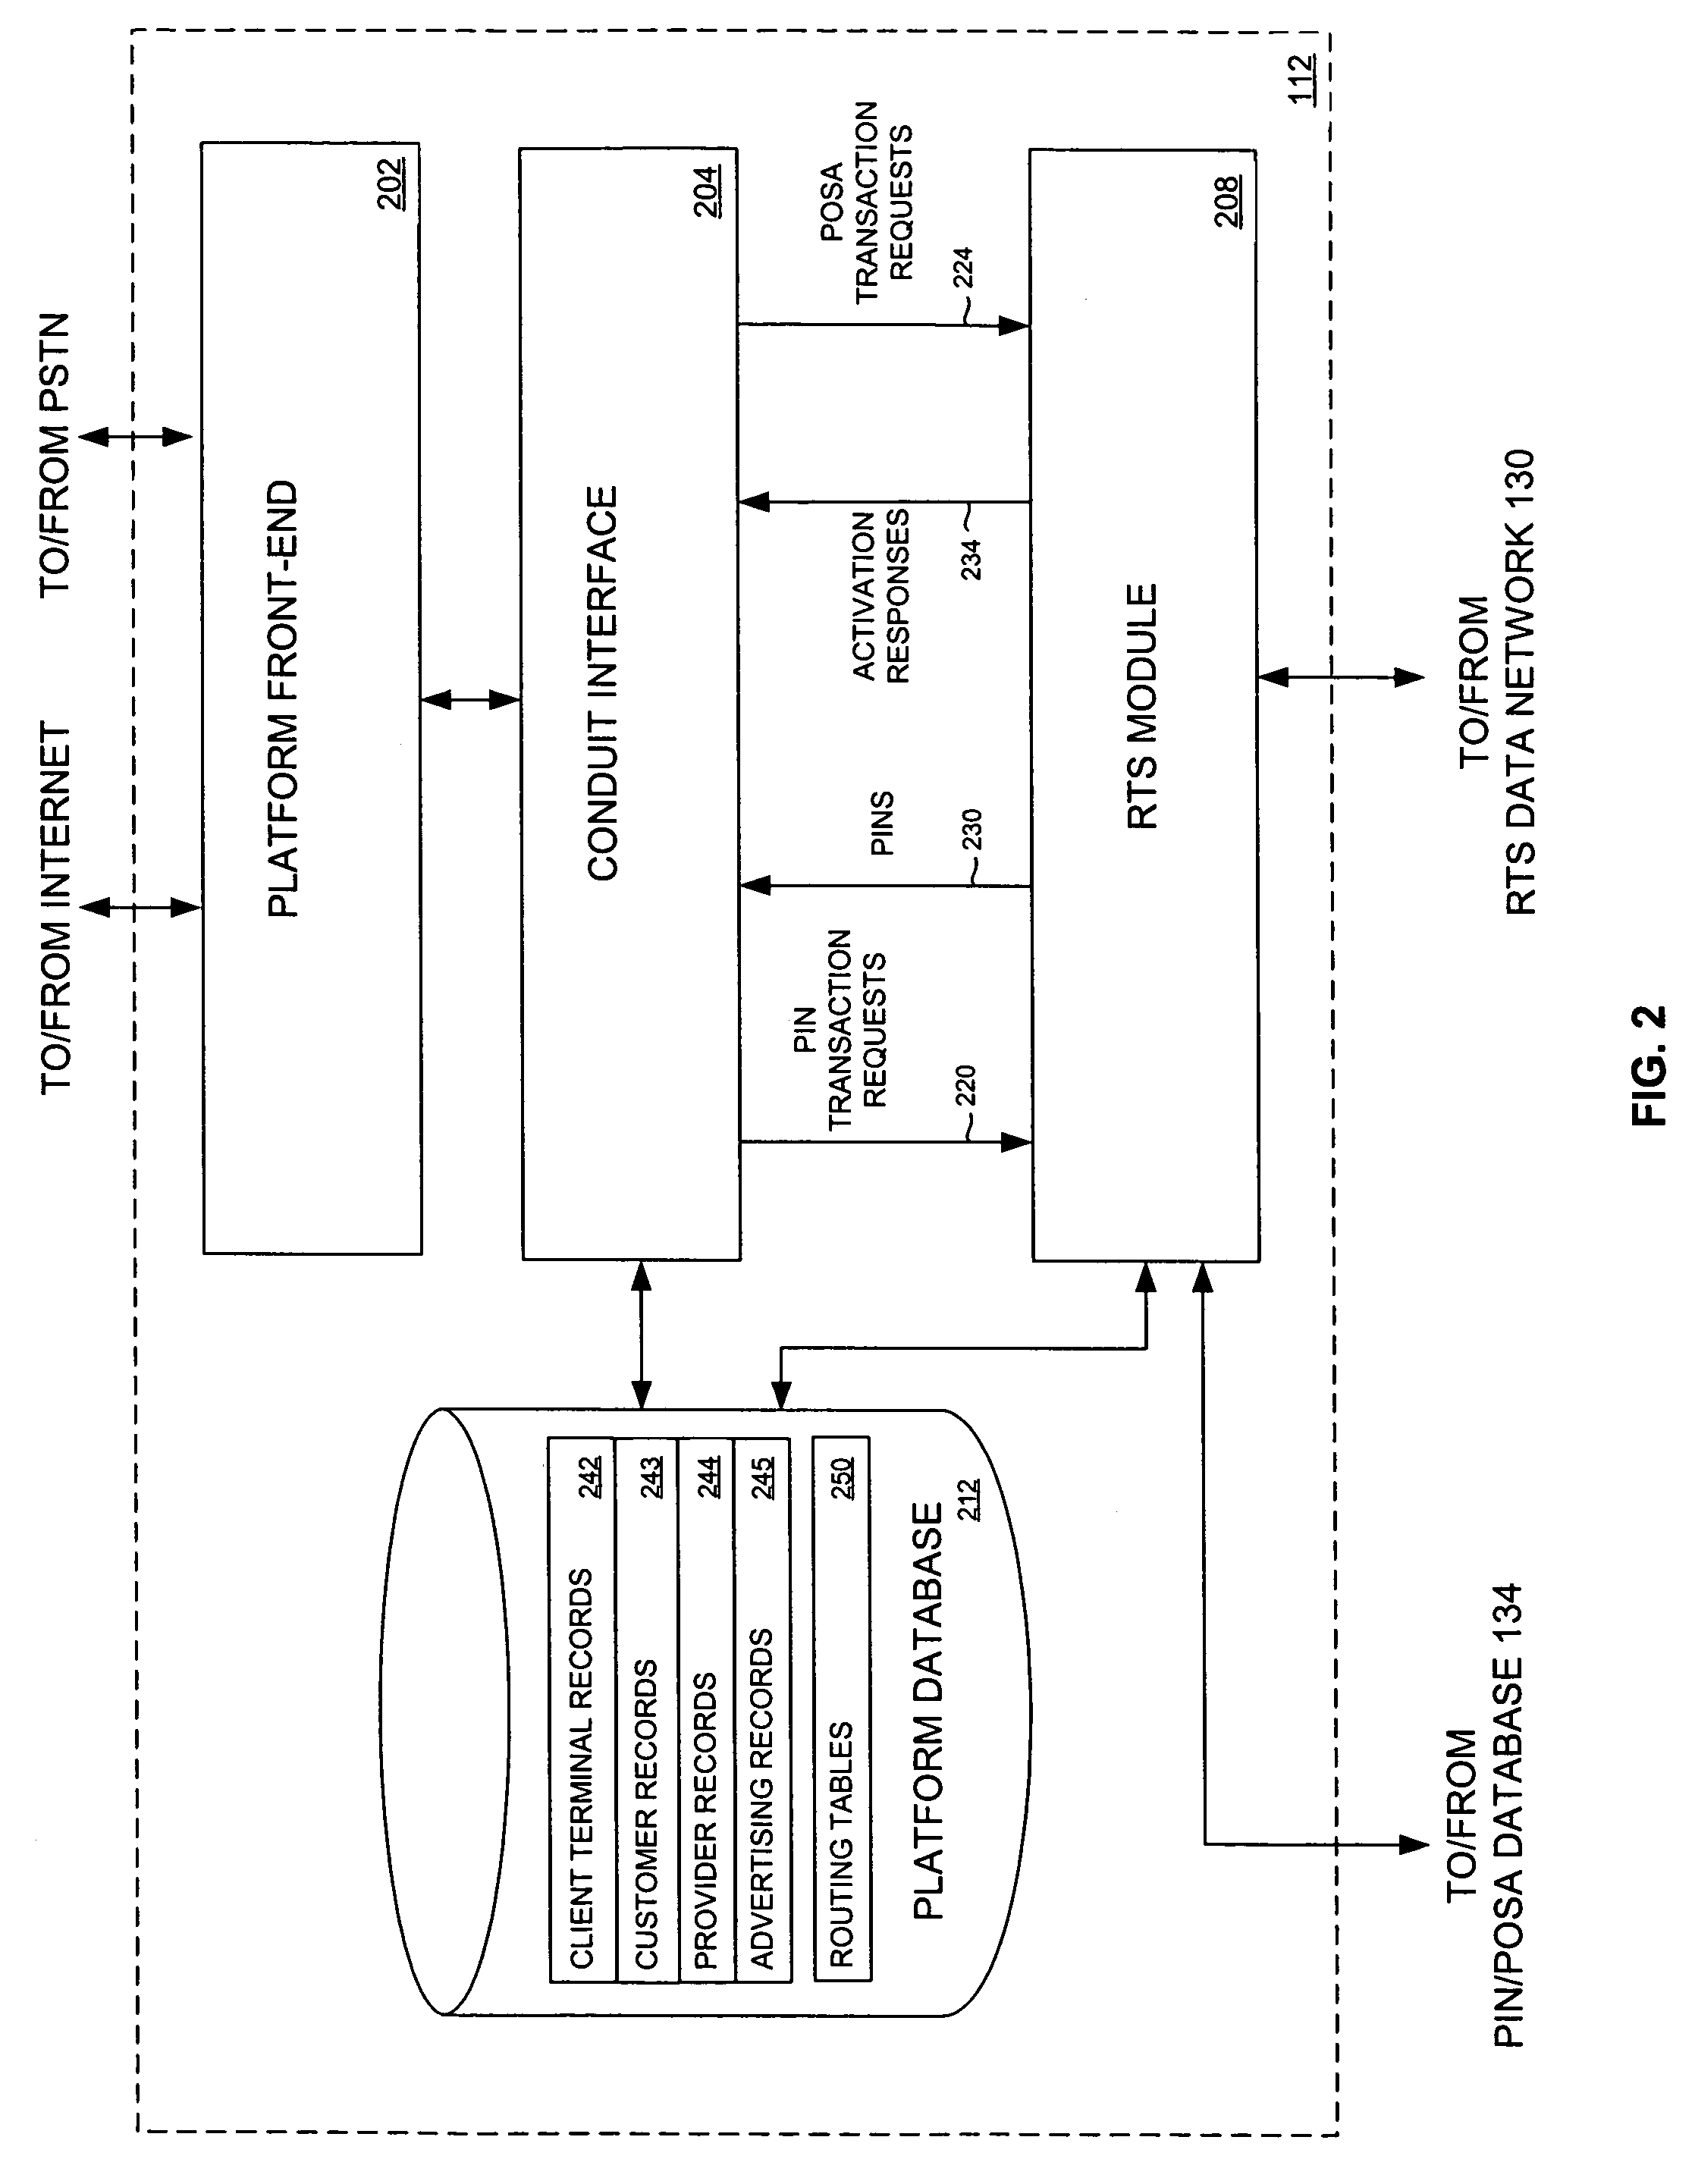 Transaction processing platform for faciliating electronic distribution of plural prepaid services